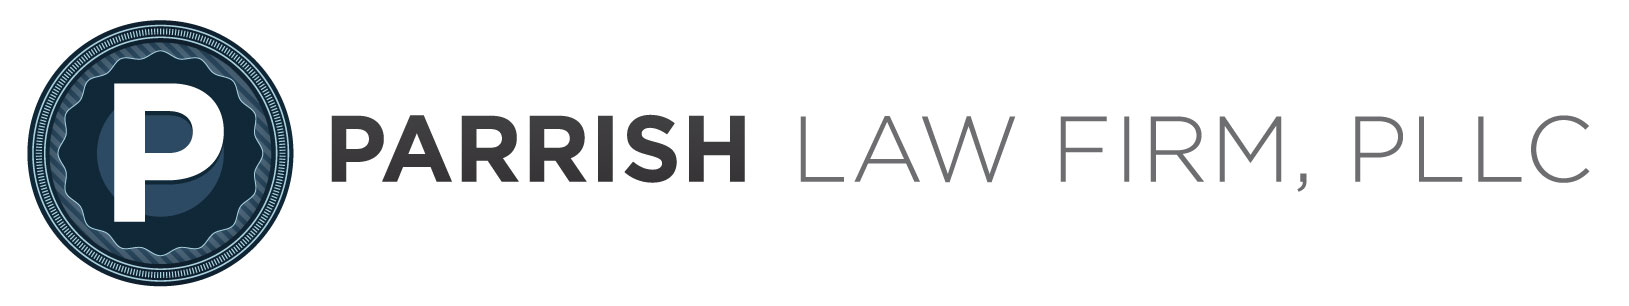 The Parrish Law Firm PLLC Logo